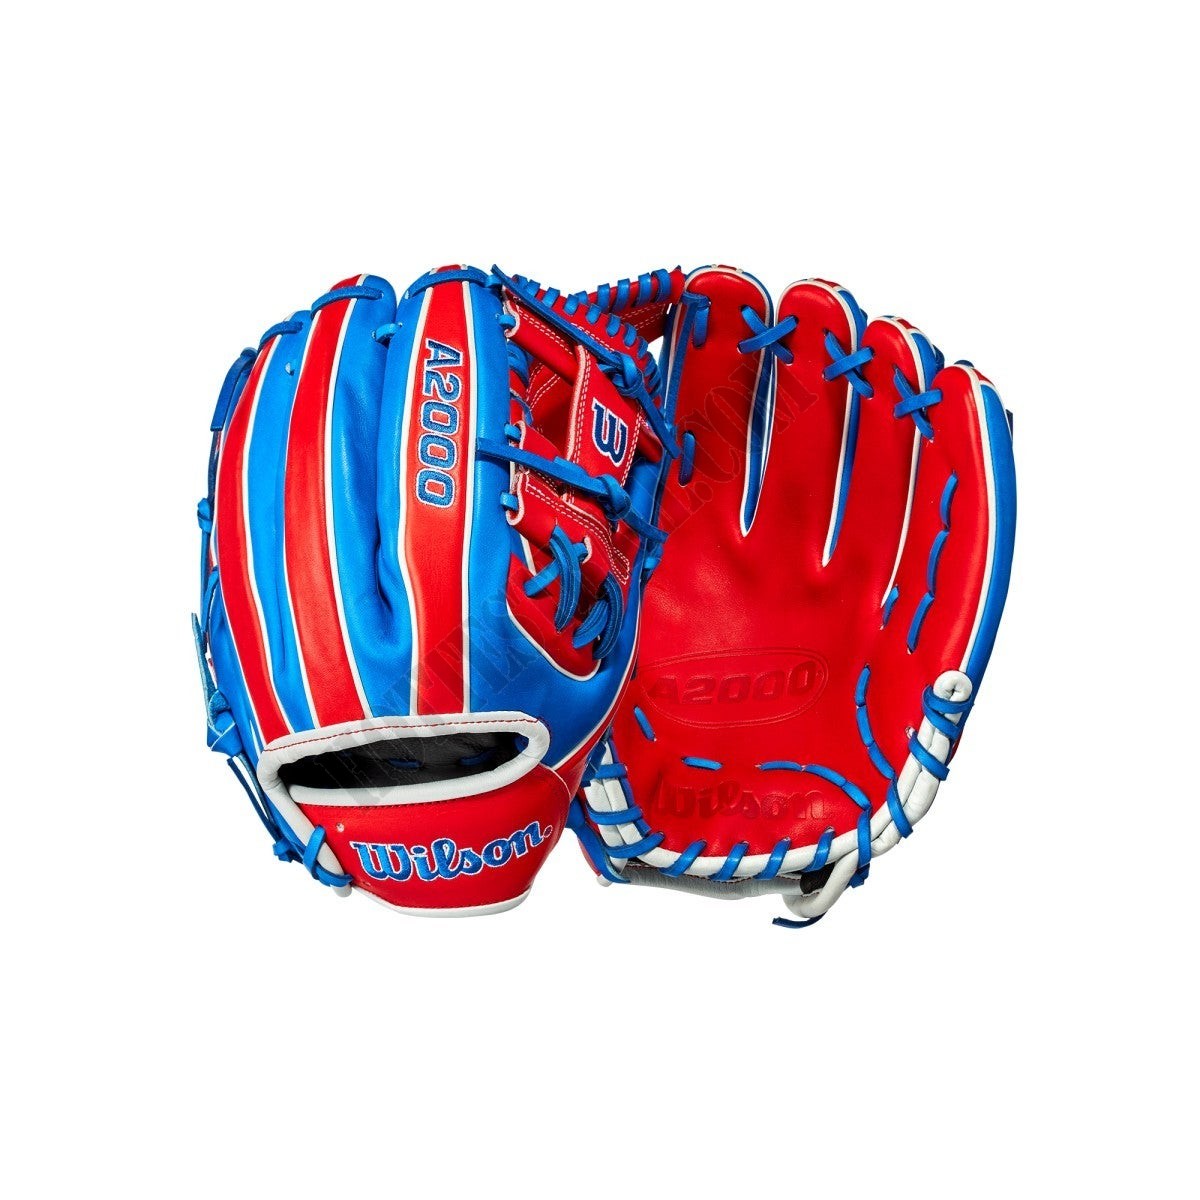 2021 A2000 1786 Puerto Rico 11.5" Infield Baseball Glove - Limited Edition ● Wilson Promotions - 2021 A2000 1786 Puerto Rico 11.5" Infield Baseball Glove - Limited Edition ● Wilson Promotions